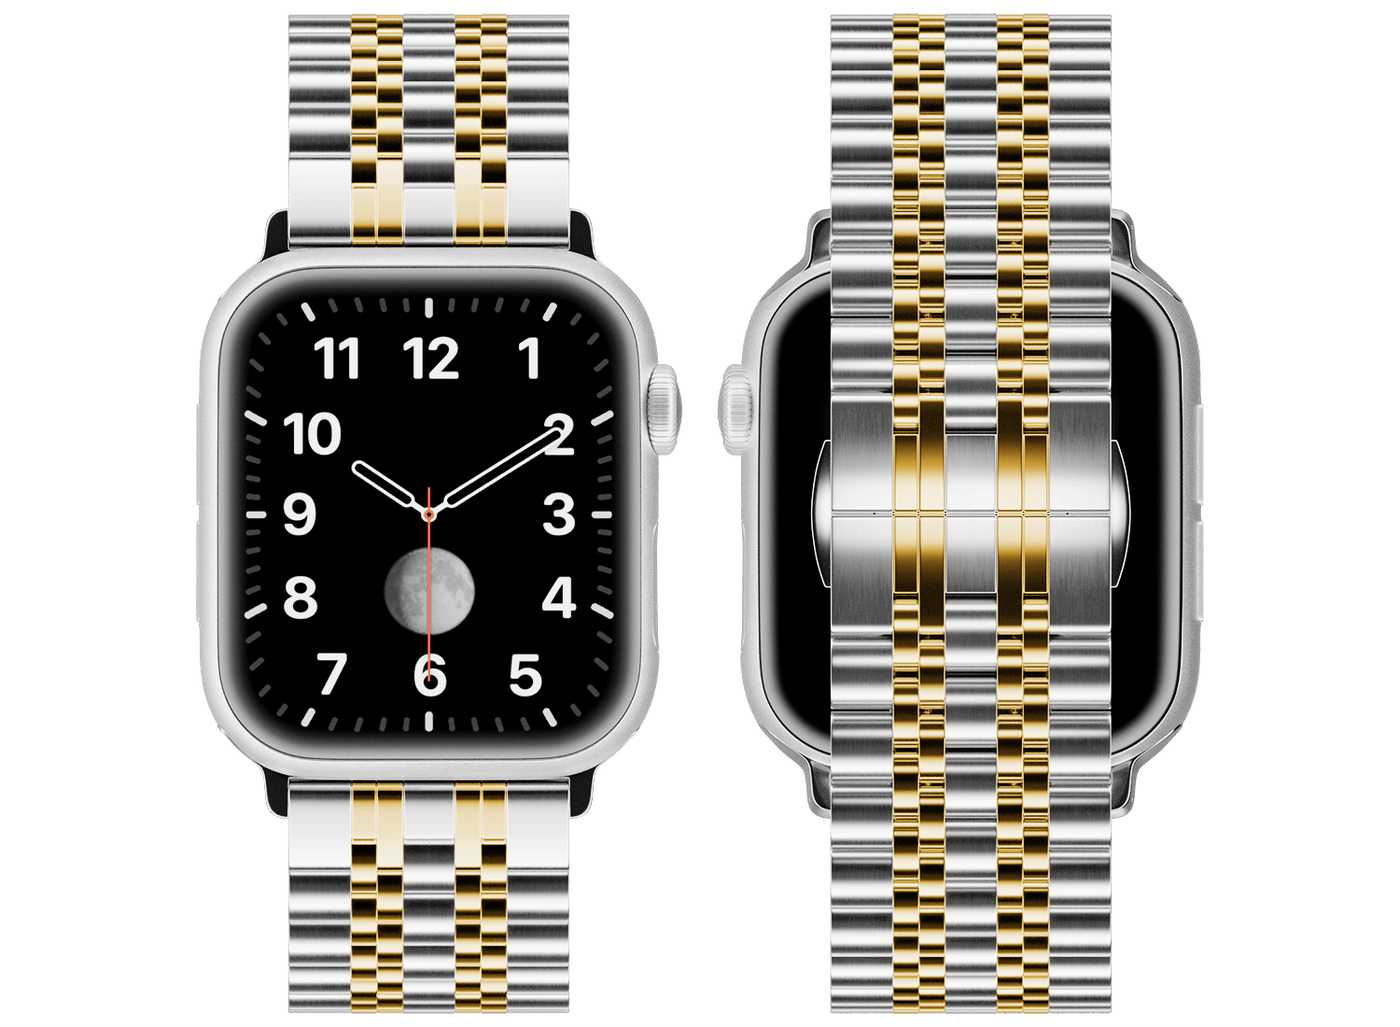 Orion Stainless Steel Band